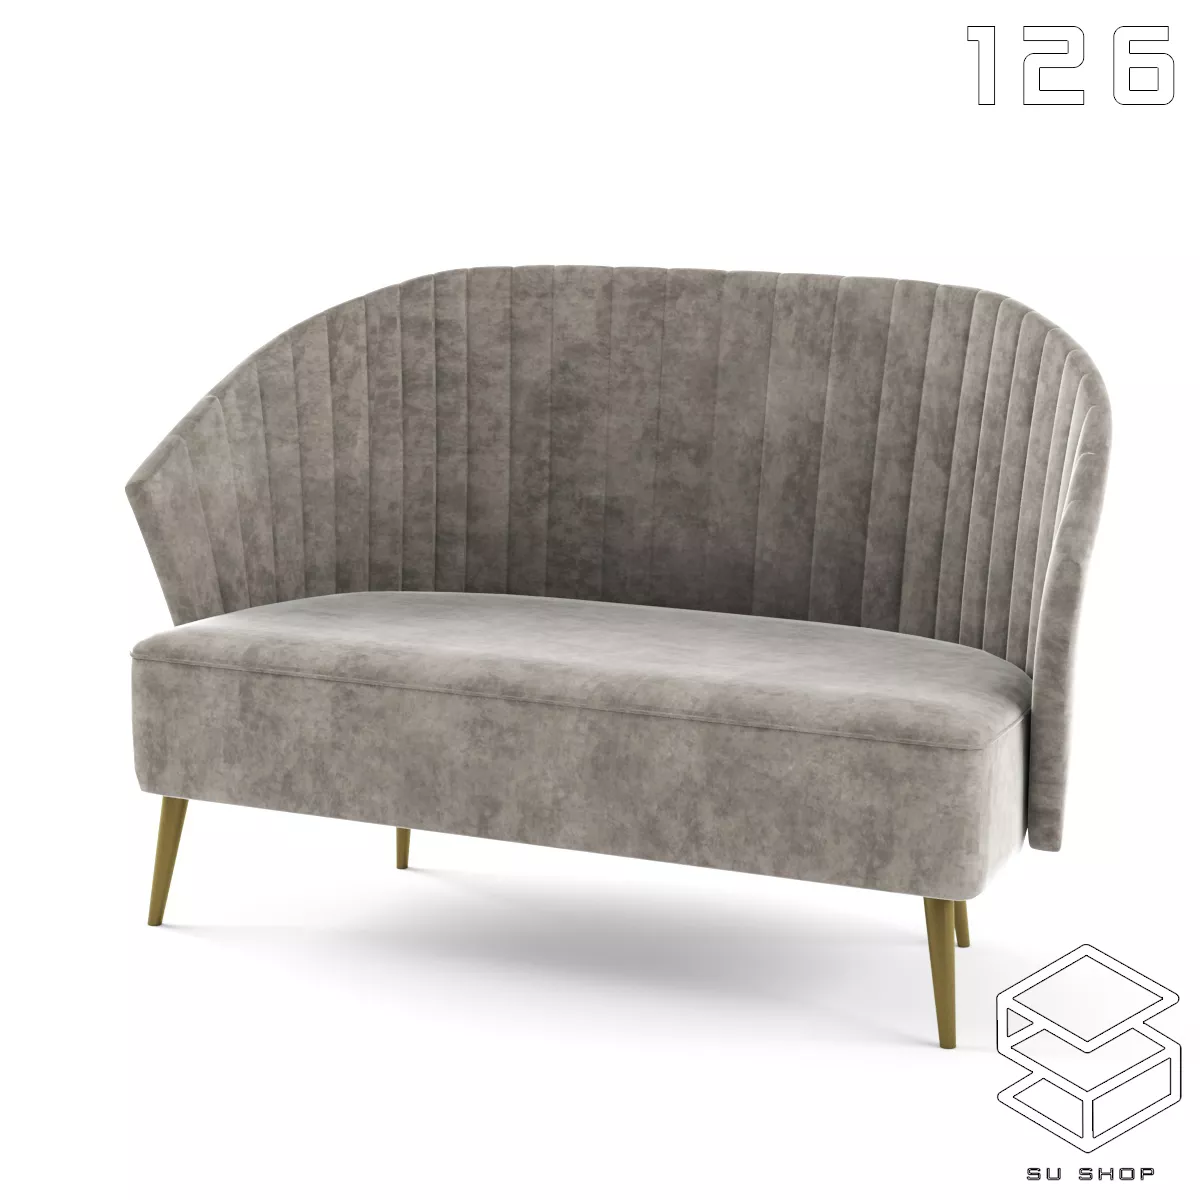 MODERN SOFA - SKETCHUP 3D MODEL - VRAY OR ENSCAPE - ID13415